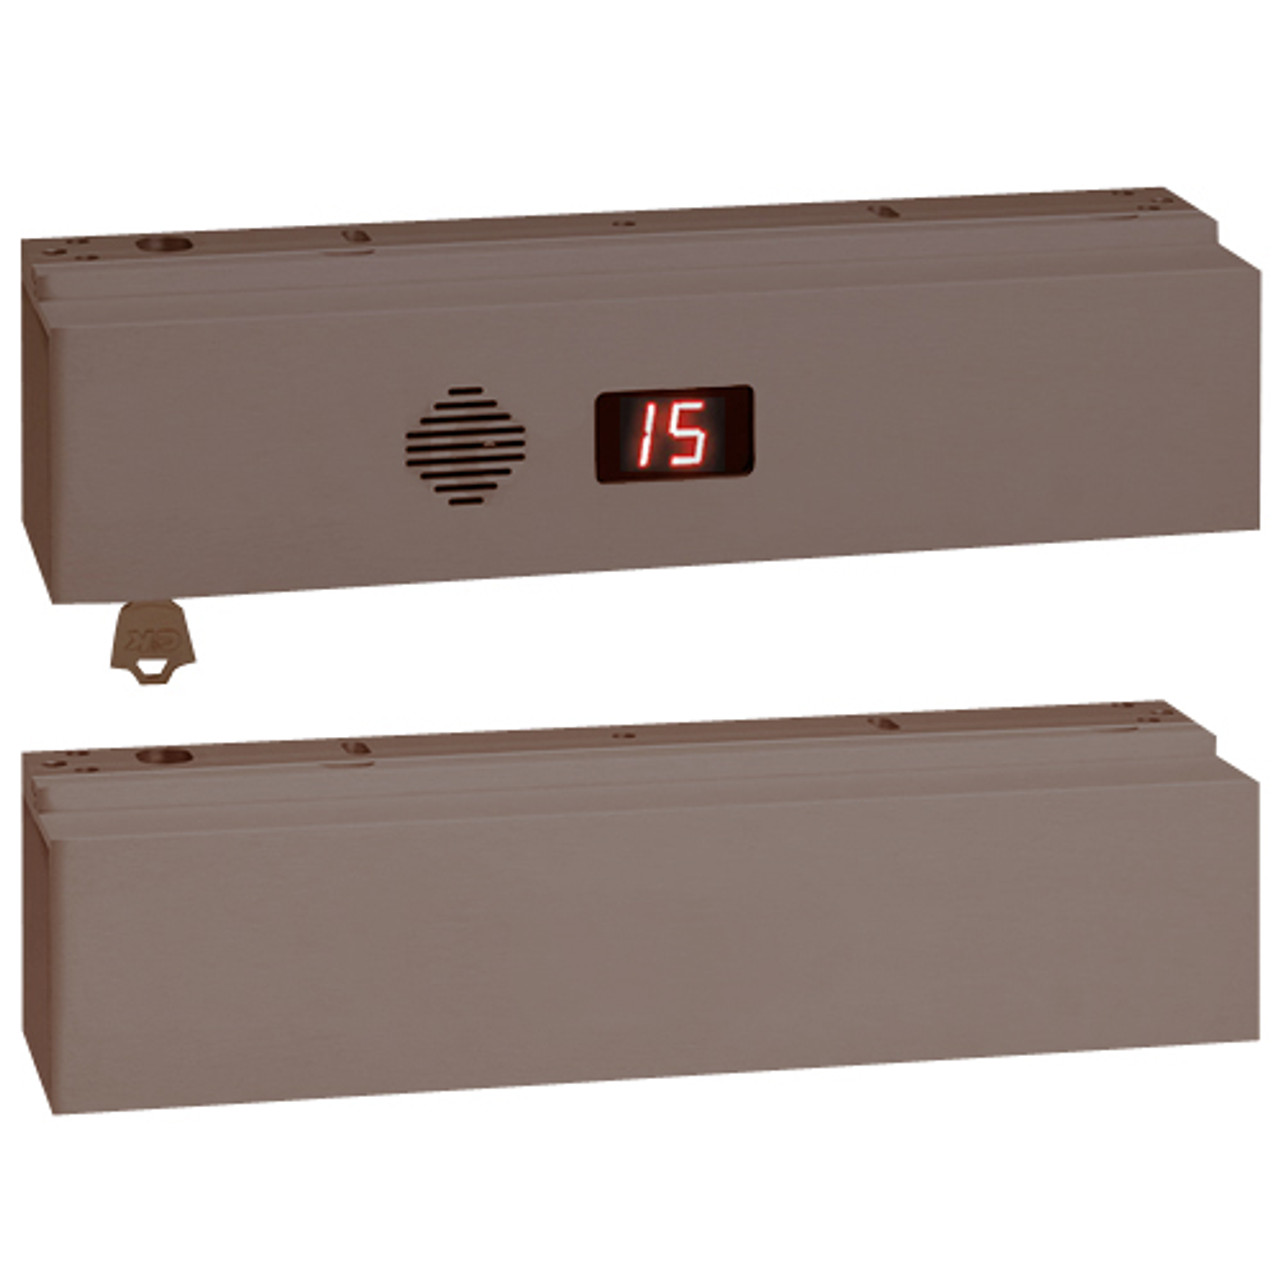 1511T-ND-K-X-D2B2A2 SDC 1511T Series Tandem Integrated Delayed Egress Locks with Door Position Status and Magnetic Bond Sensor in Dark Bronze